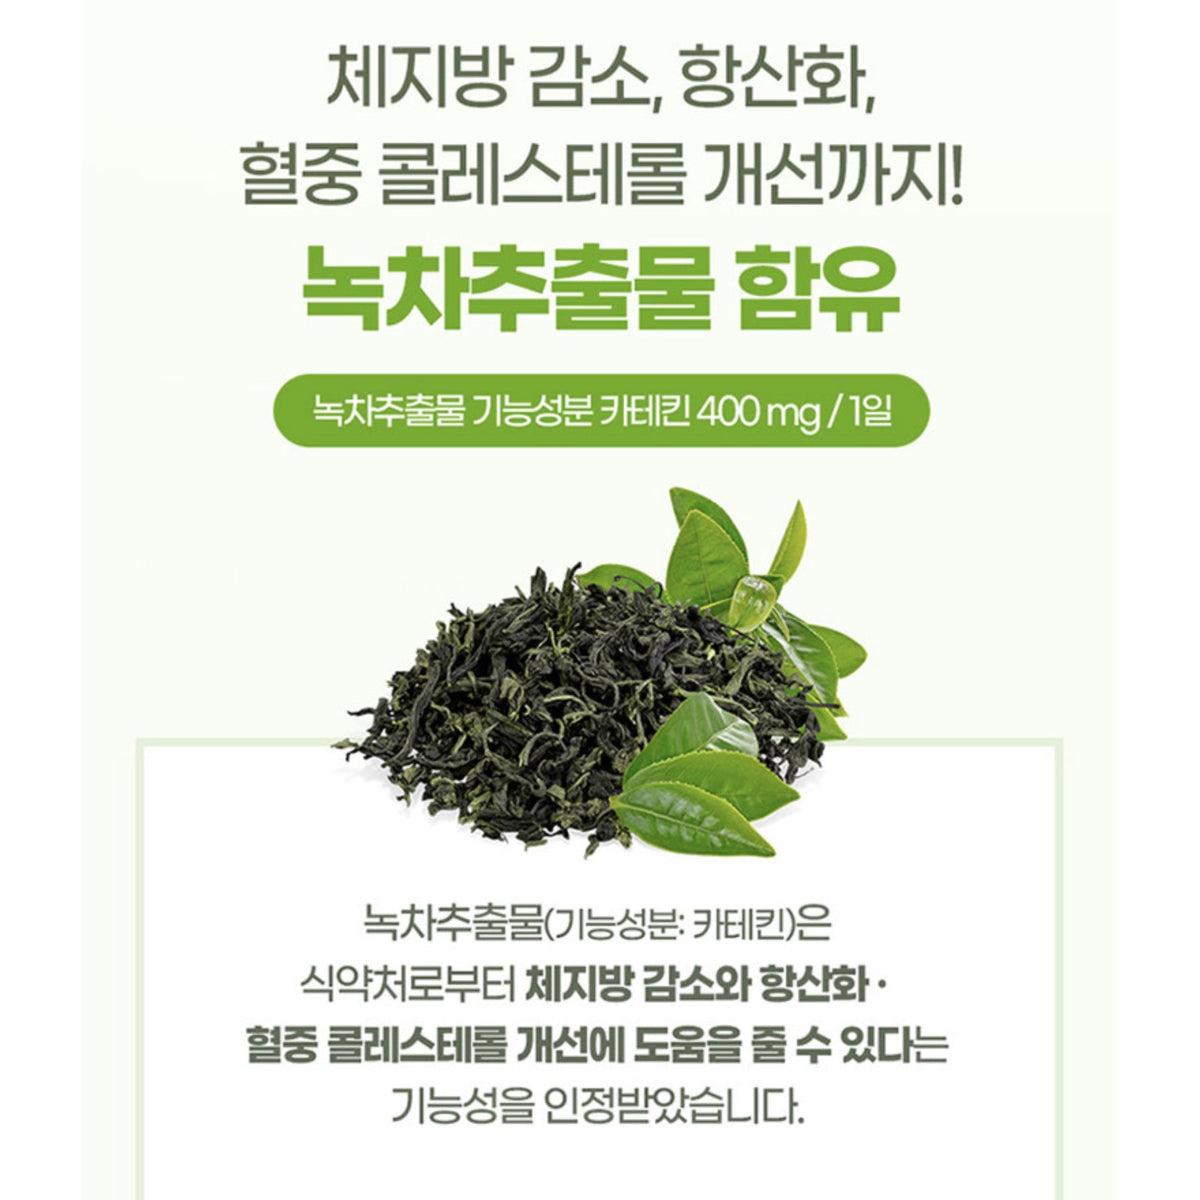 GNM Green Cut Catechin After Green Tea Extract for healthy diet for 12 weeks 56tabs/Bottle Vitamin B C Selenium Pantothenate / from Seoul, Korea